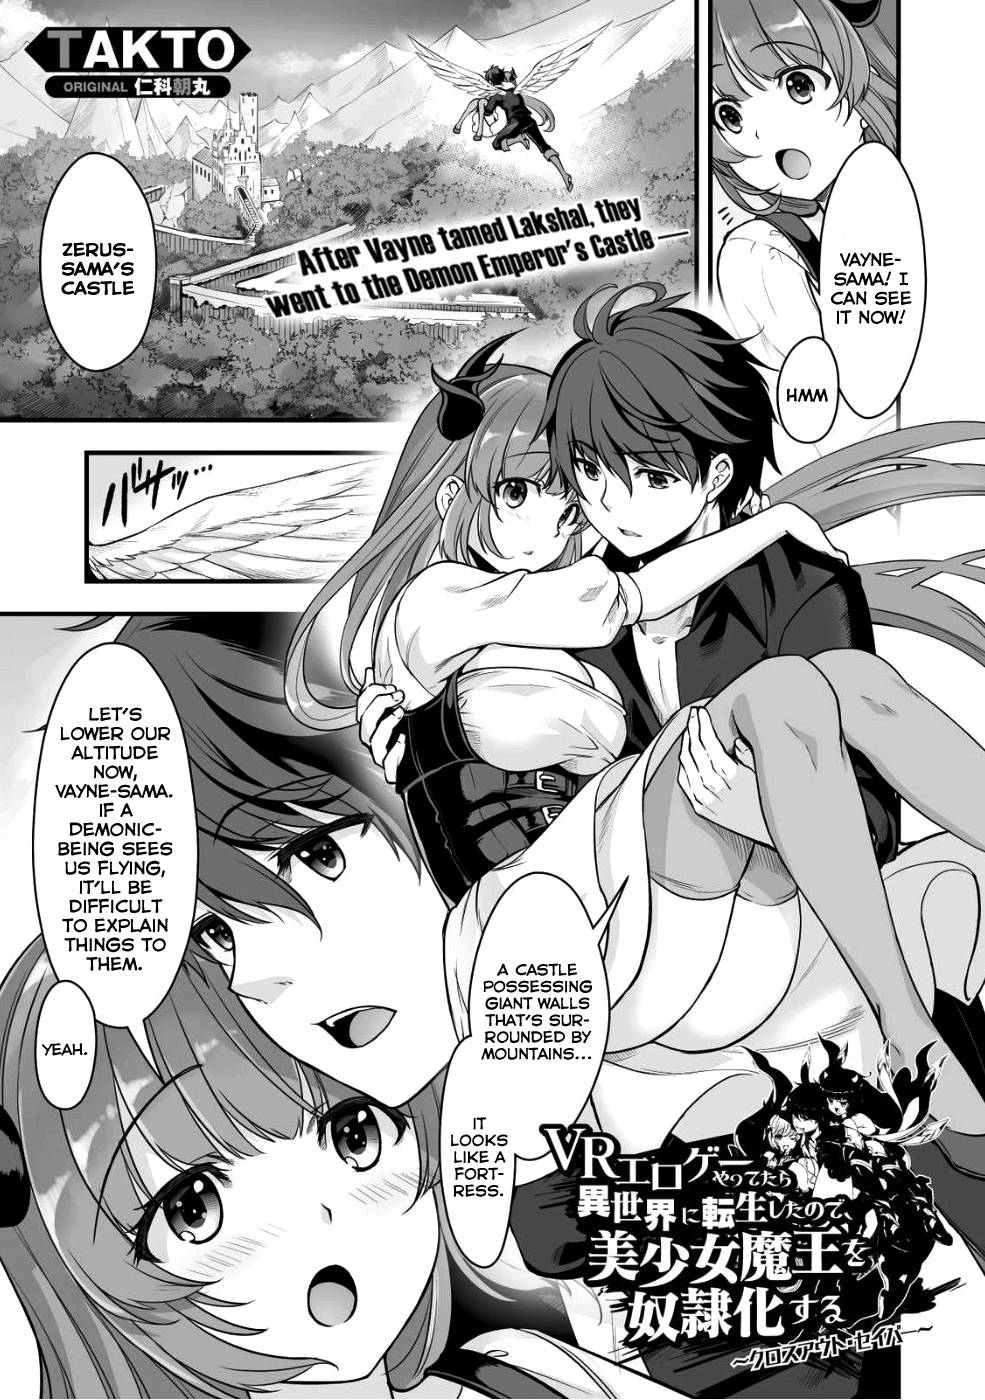 When I Was Playing Eroge With VR, I Was Reincarnated In A Different World, I Will Enslave All The Beautiful Demon Girls ~Crossout Saber~ - chapter 3 - #1